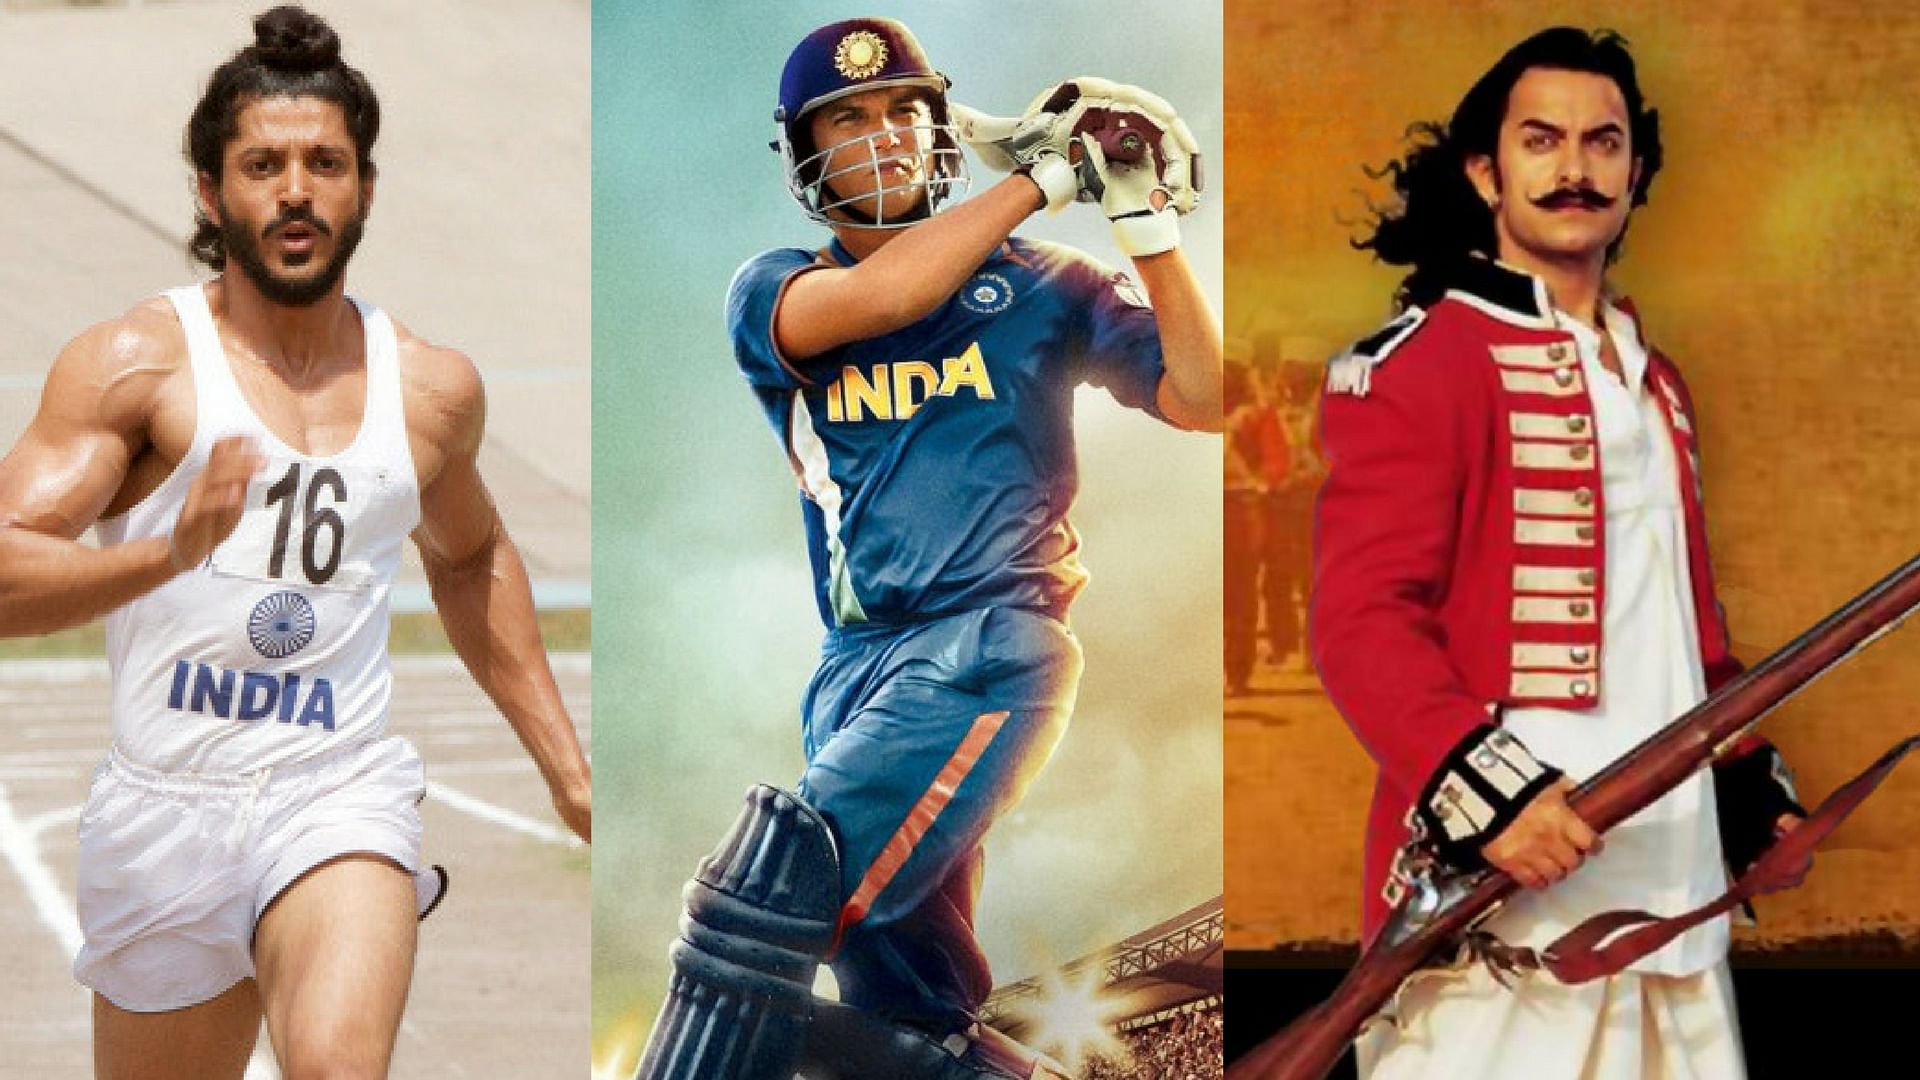 

Posters of <i>Bhaag Milkha Bhaag</i>, <i>MS Dhoni: The Untold Story</i> and<i> Mangal Pandey: The Rising</i>.